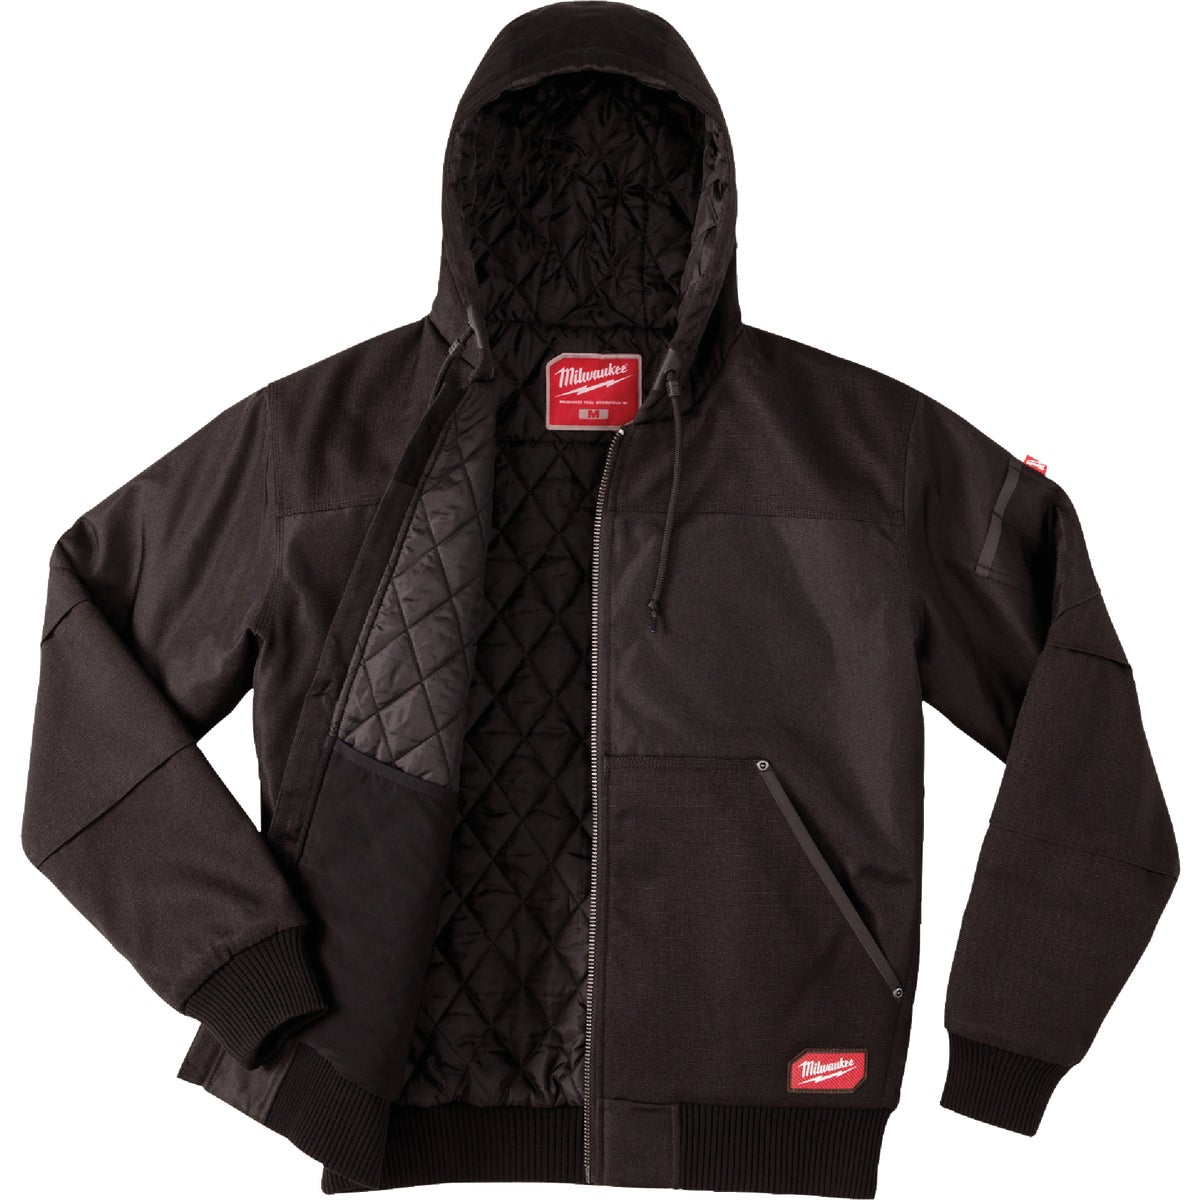 Item 705379, Jobsite hooded jacket designed to outlast the elements.